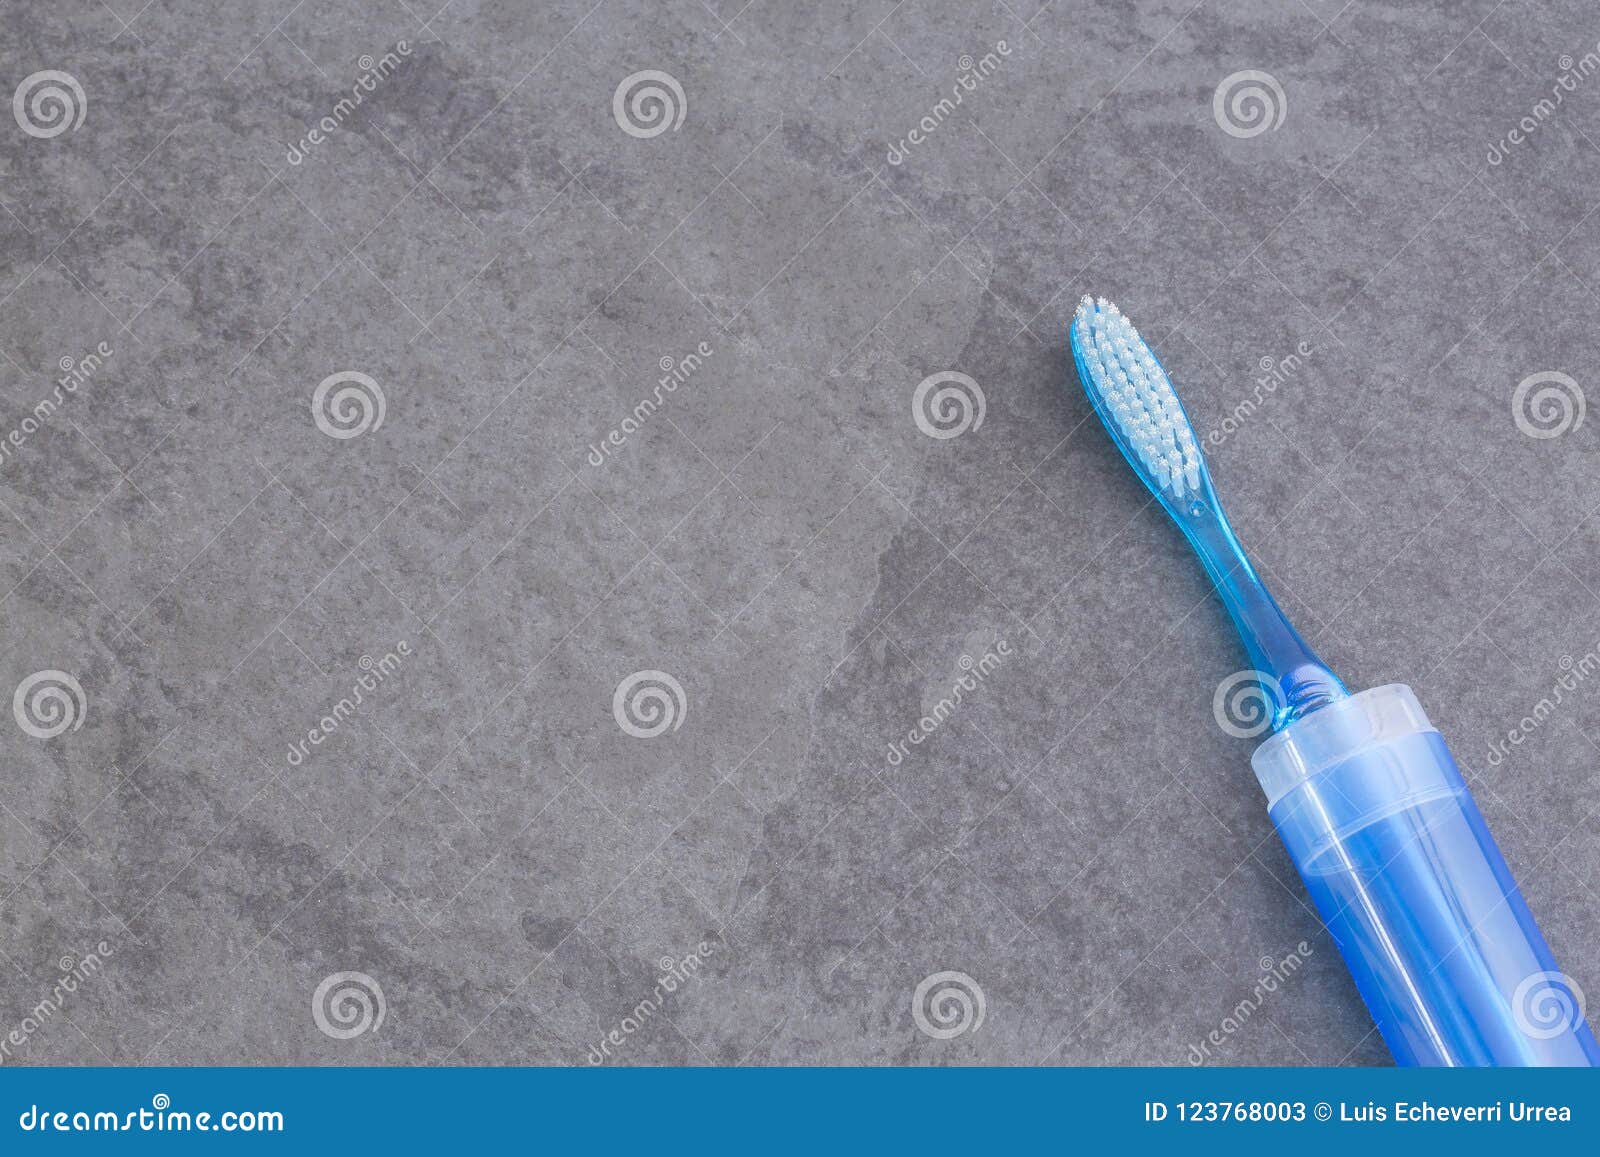 toothbrush with plastic case - top view